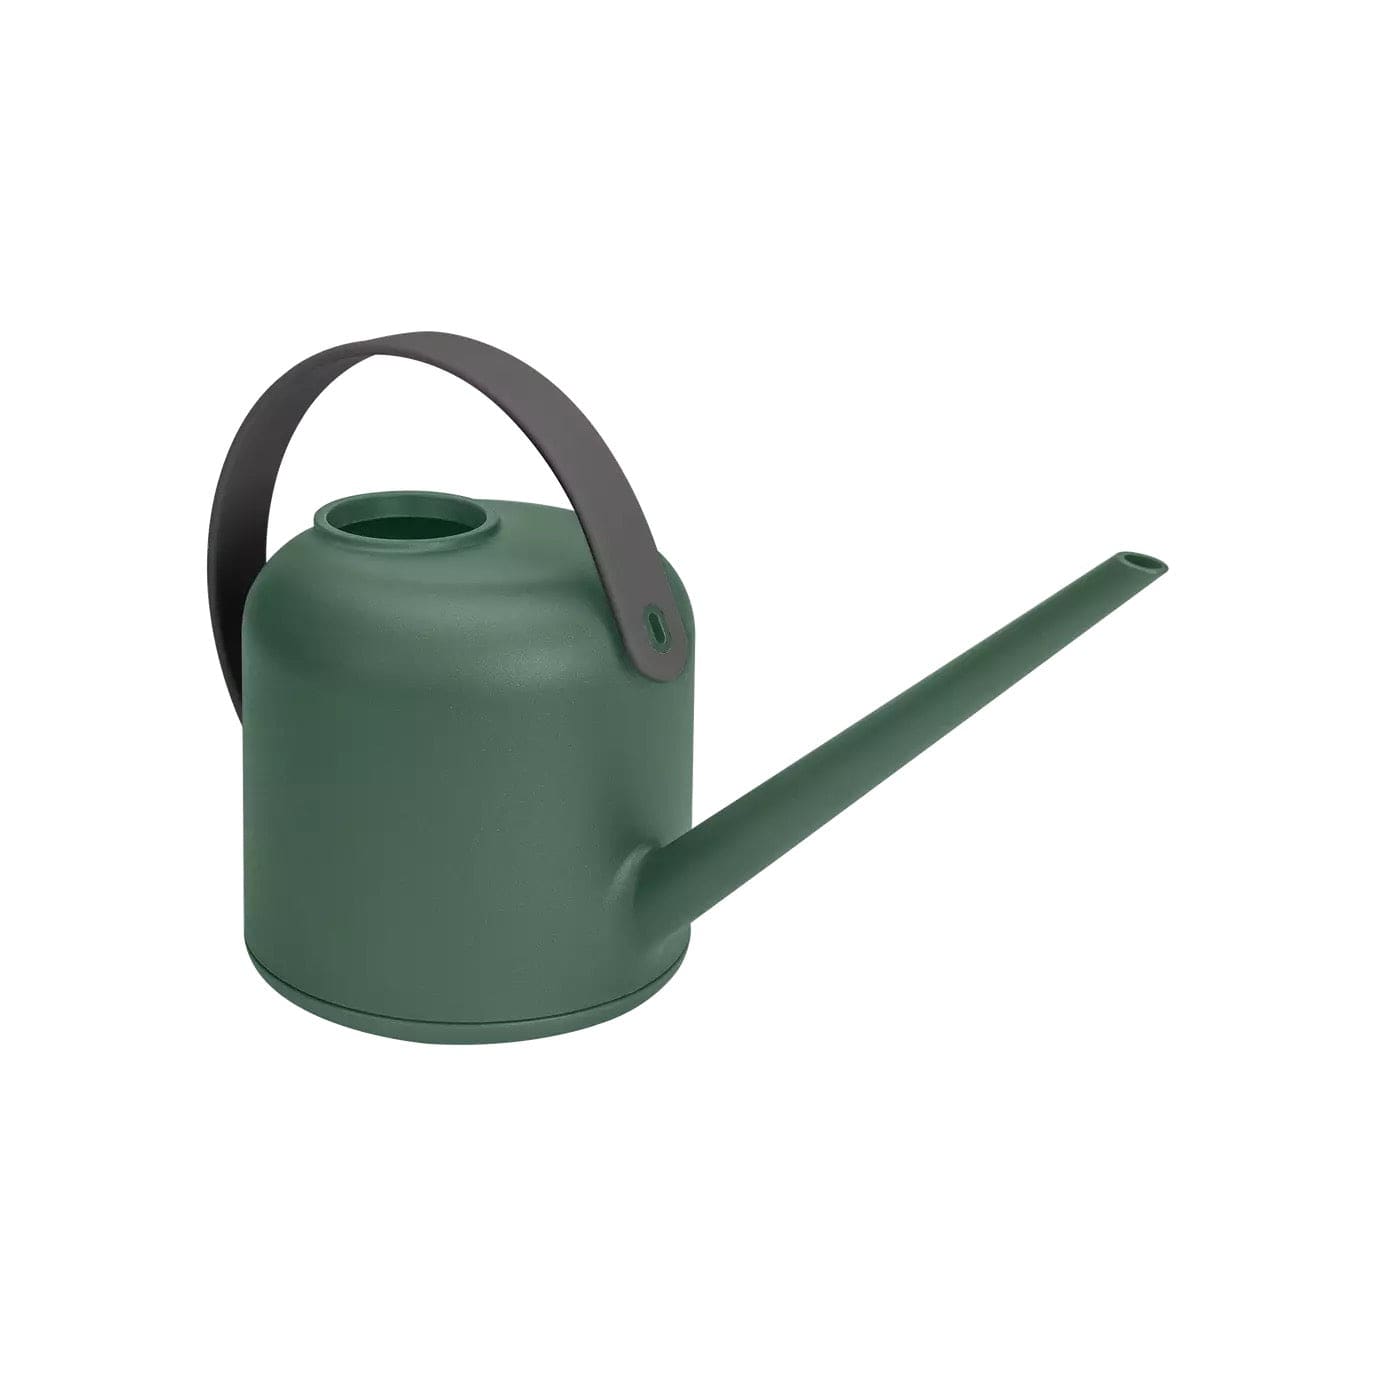 Elho Watering Can Watering Can - Recycled Plastic ' b.for soft' - Leaf Green